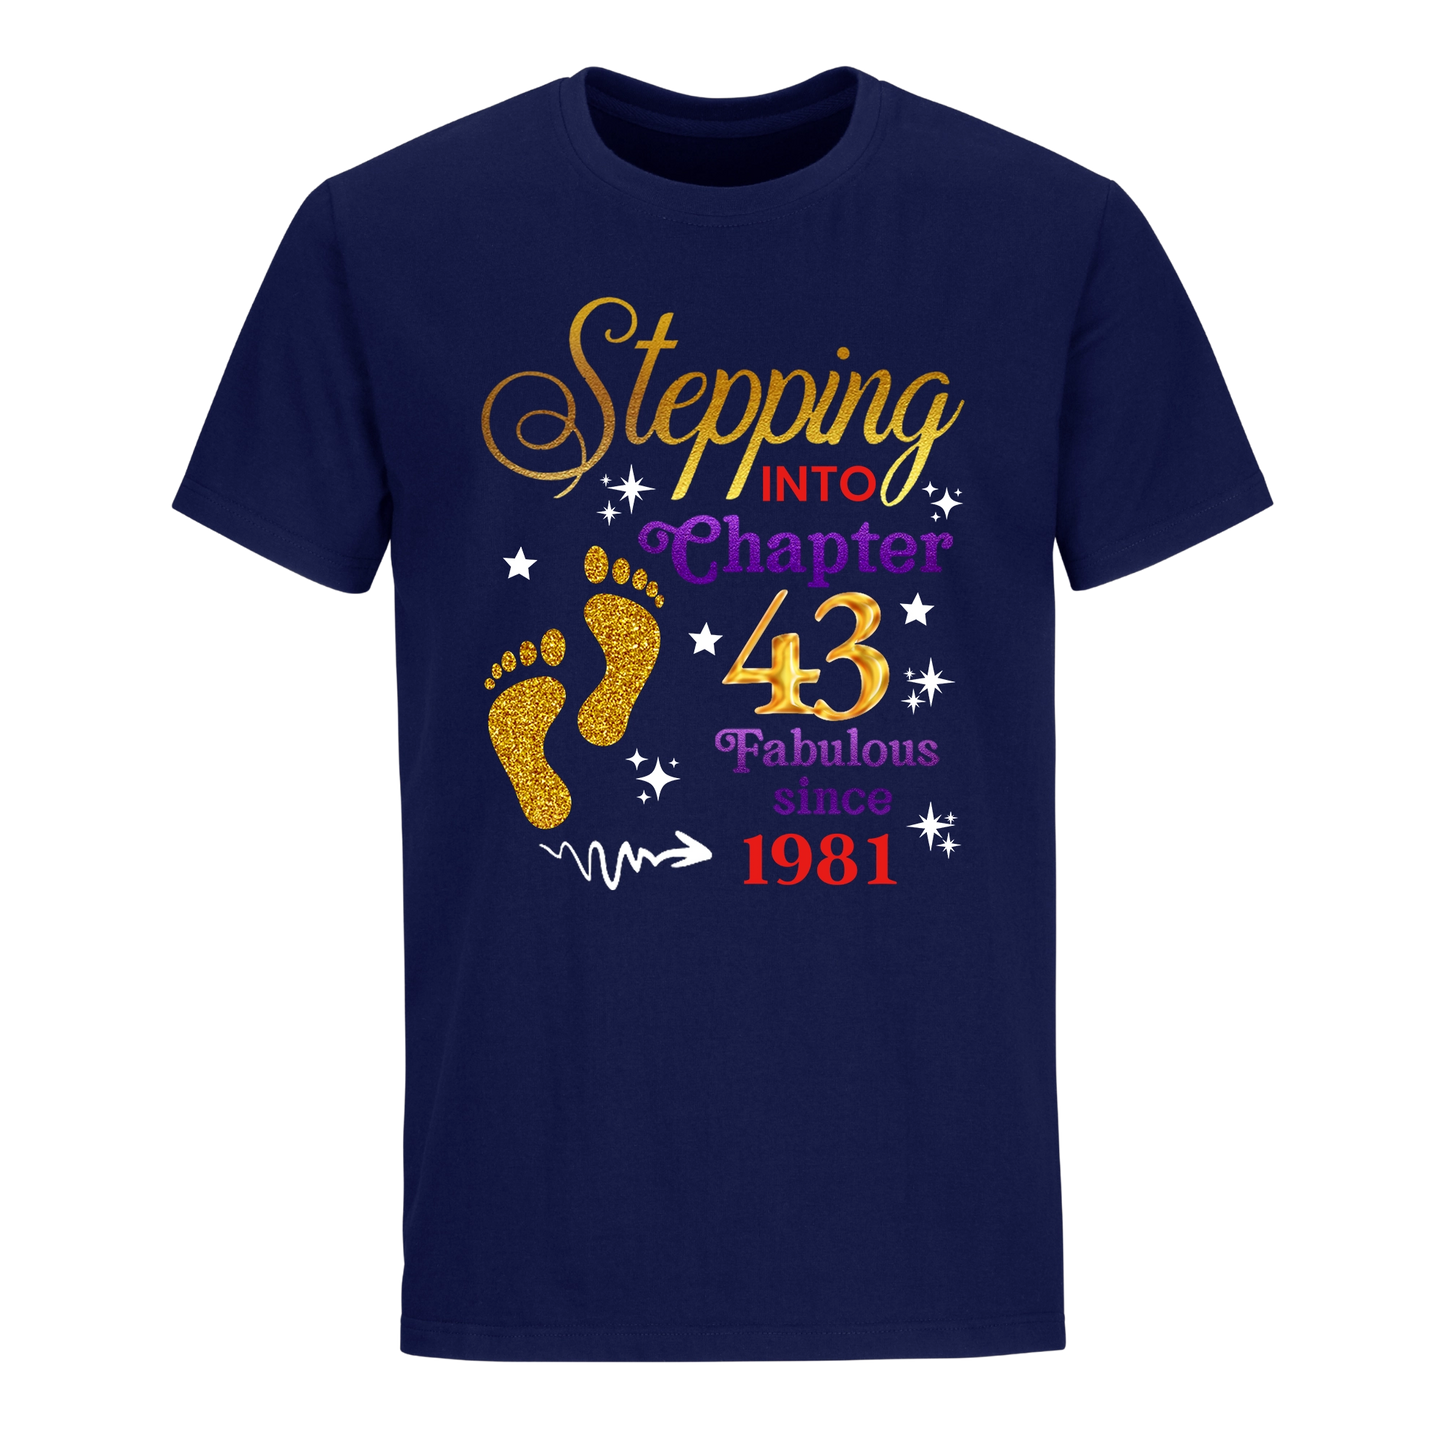 STEPPING INTO MY 43RD 1981 UNISEX SHIRT